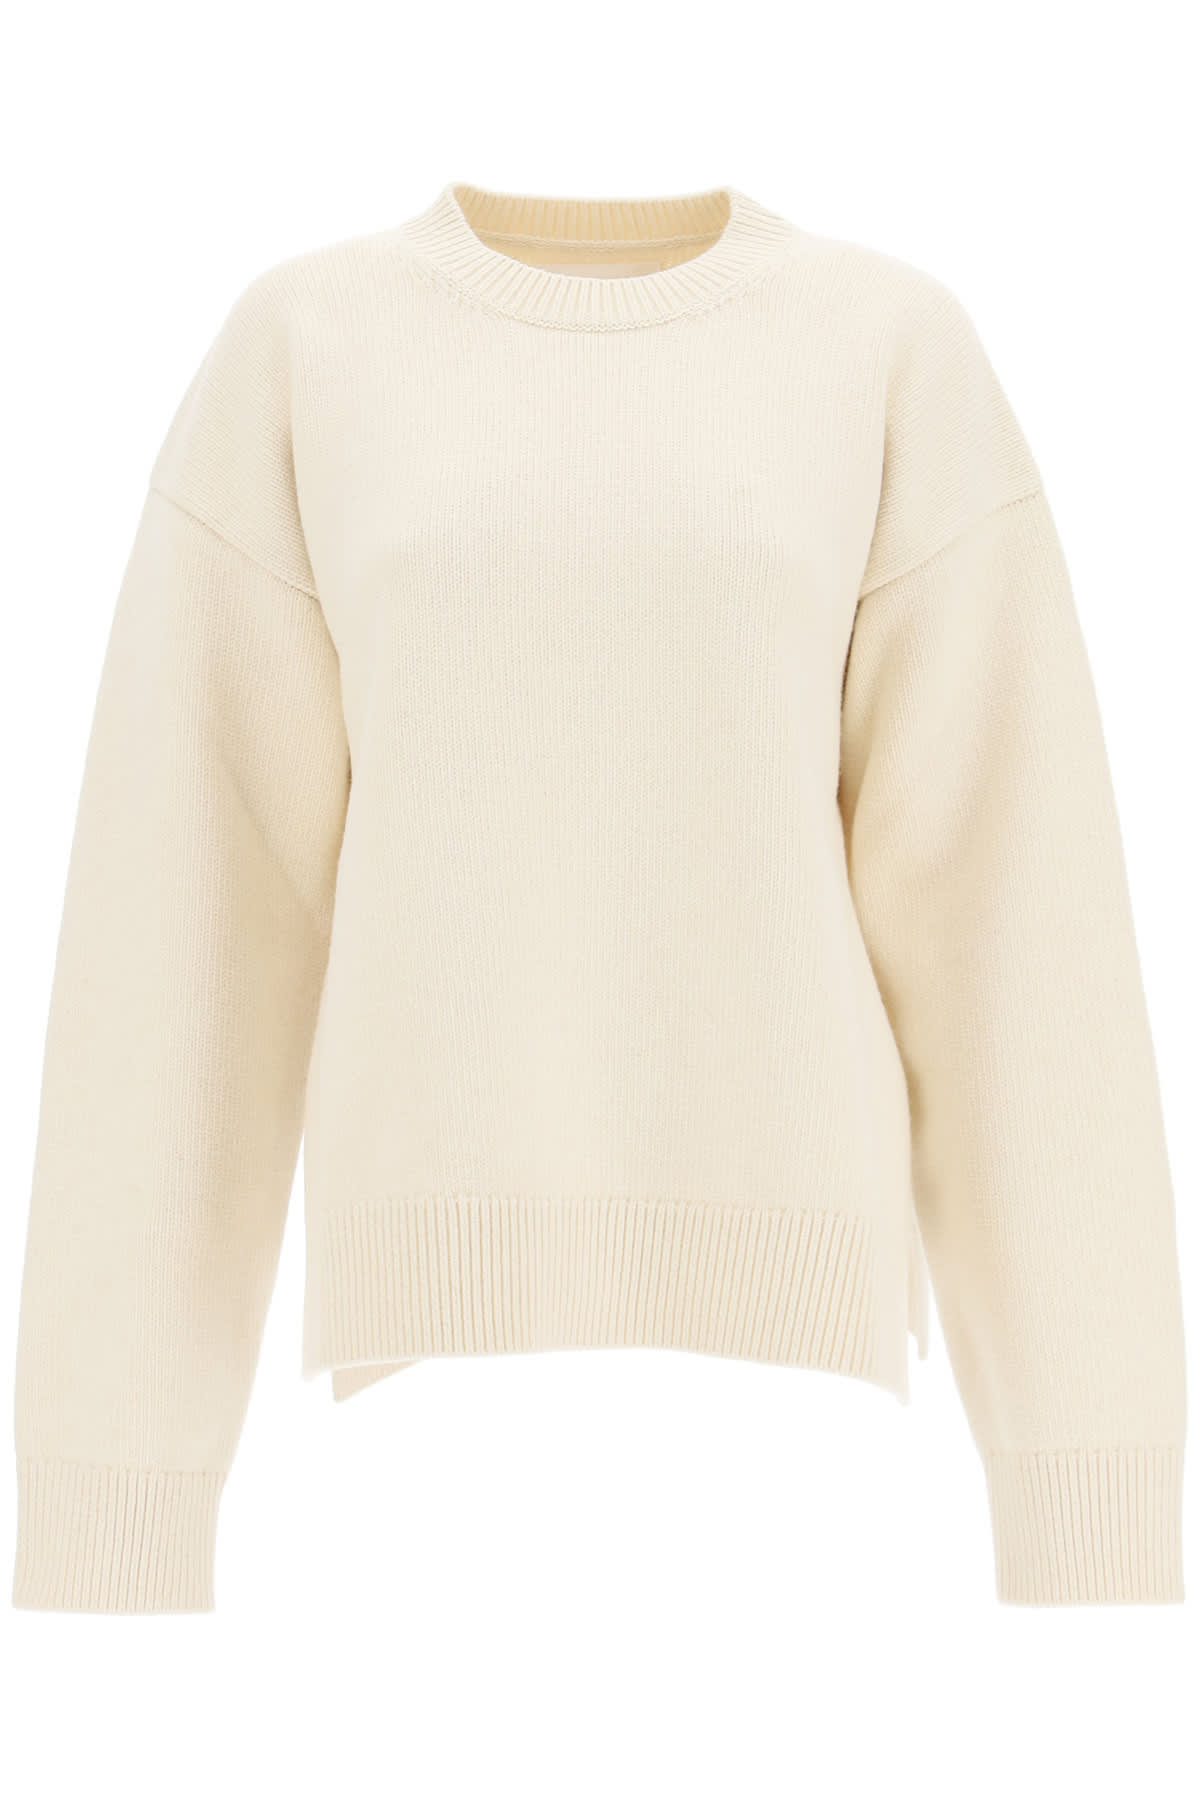 Jil Sander Wool And Cashmere Blend Sweater